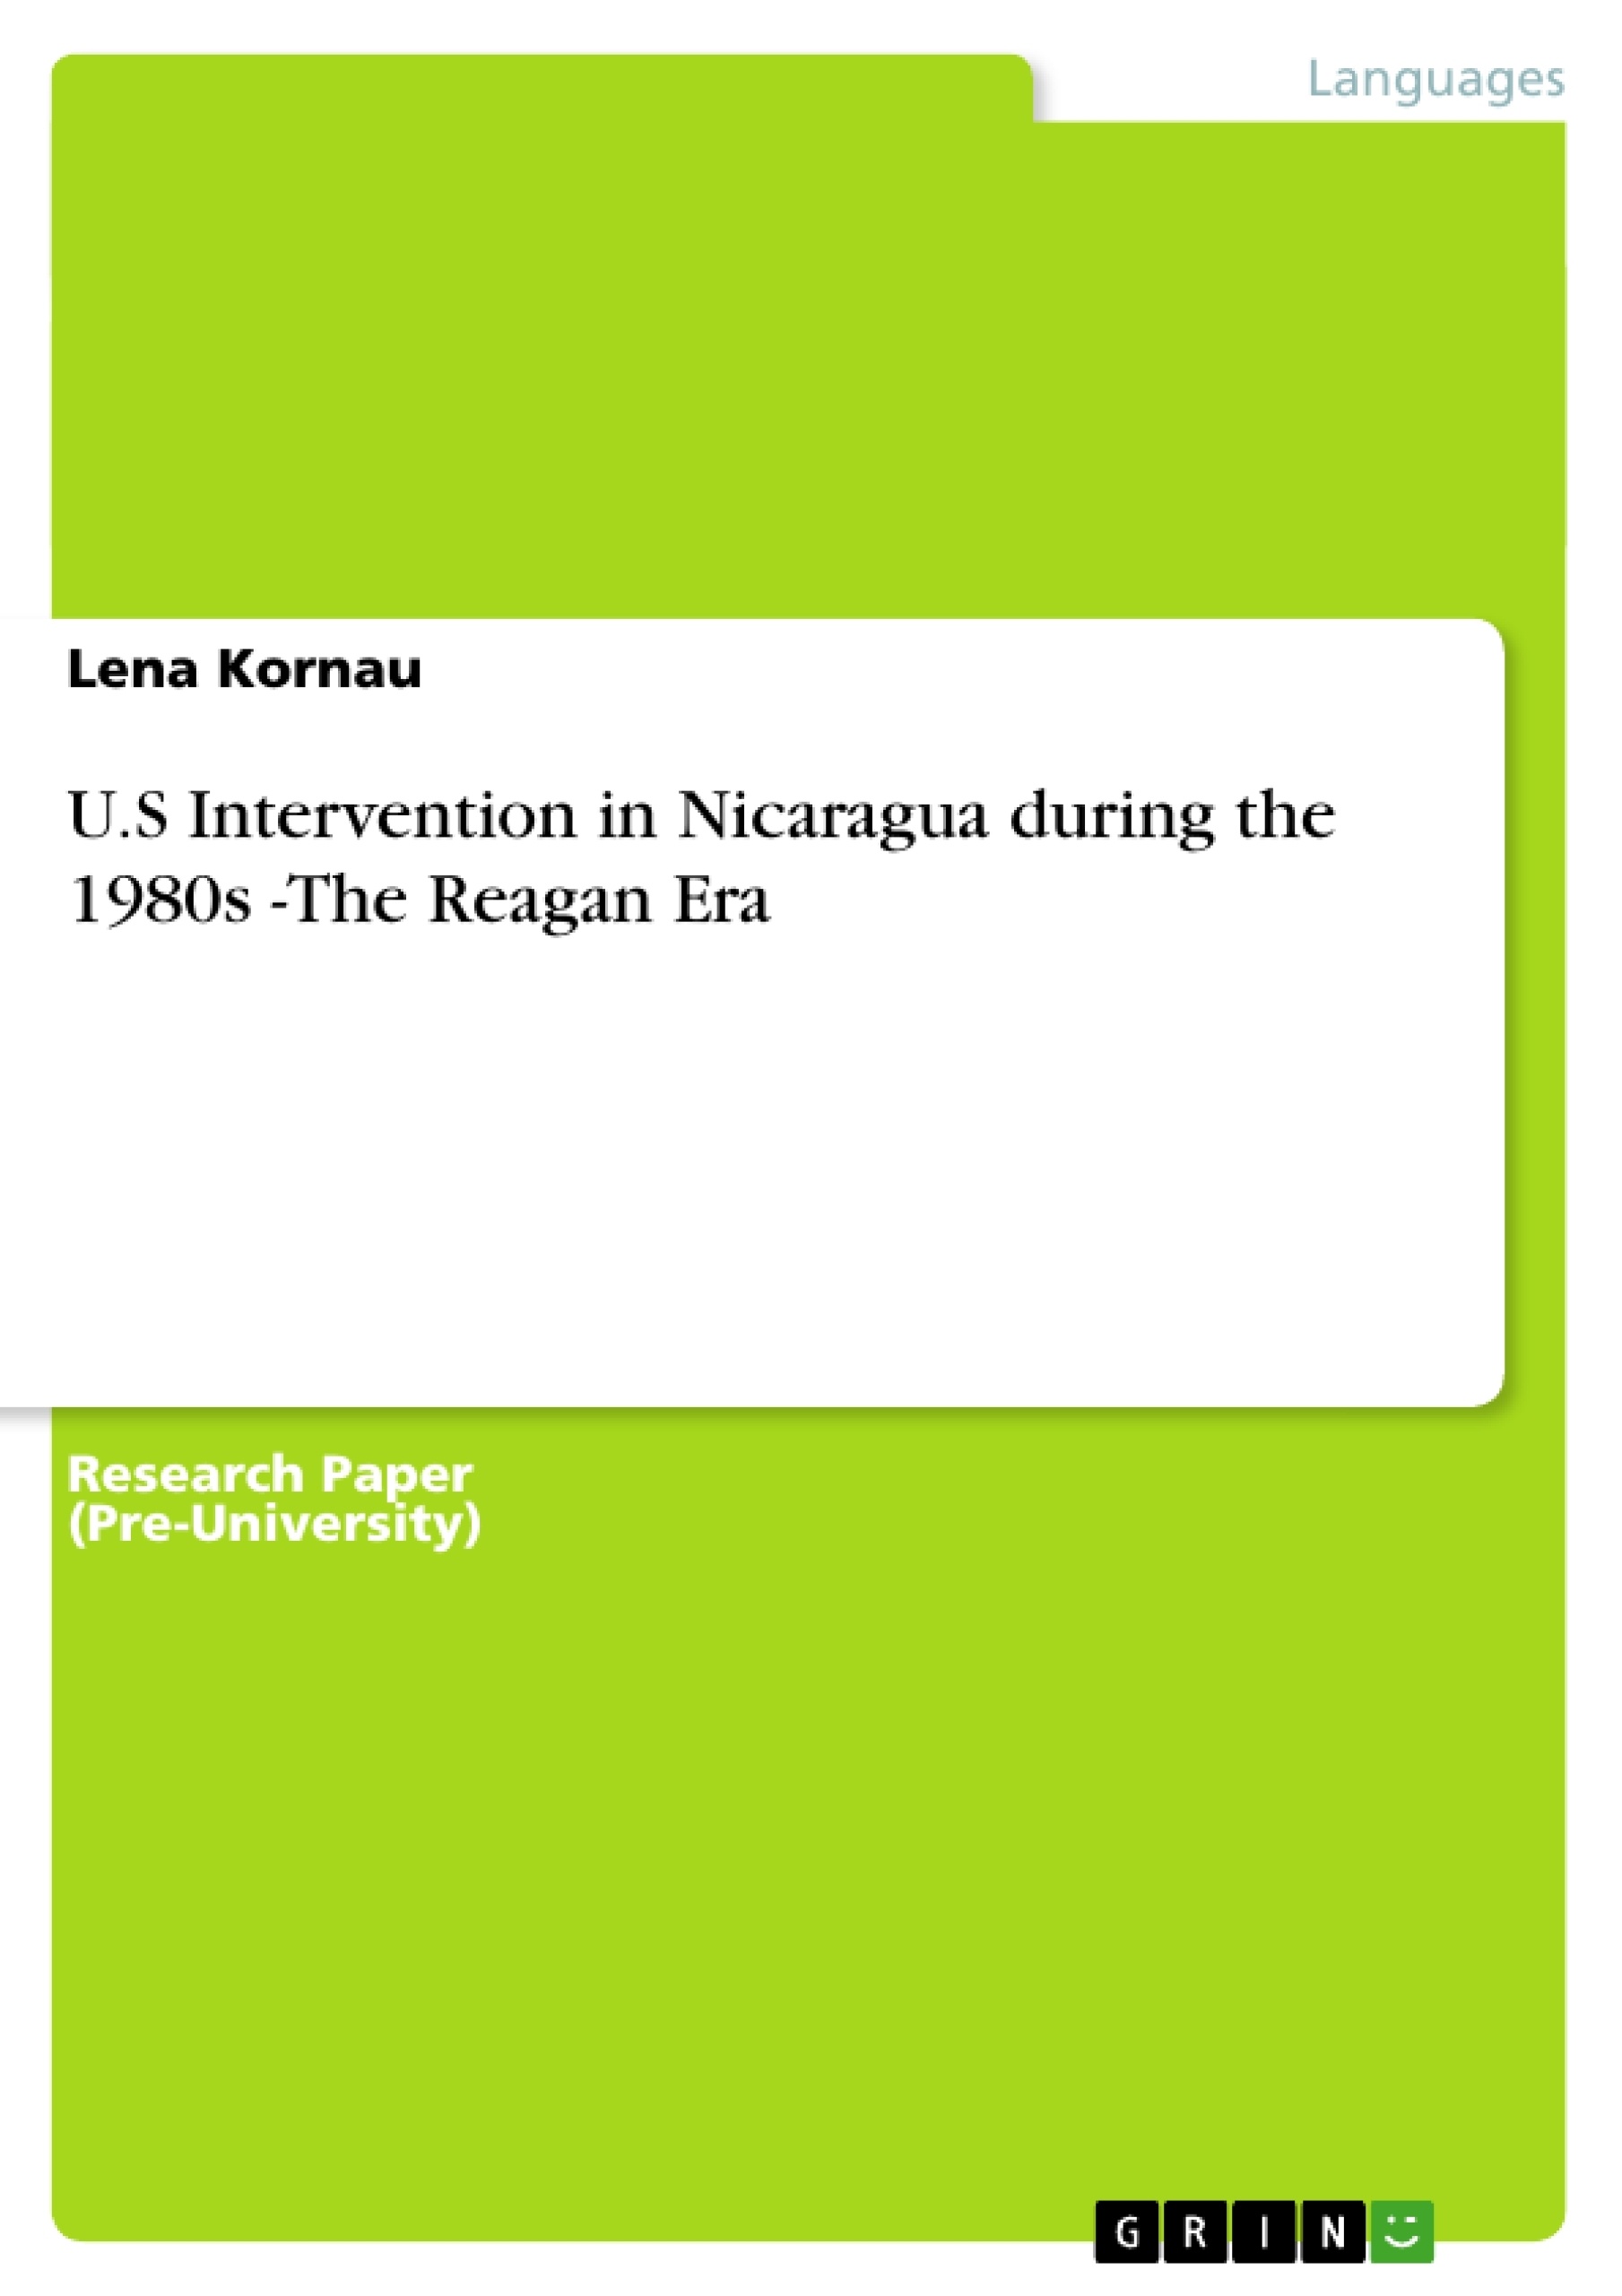 Title: U.S Intervention in Nicaragua during the 1980s -The Reagan Era